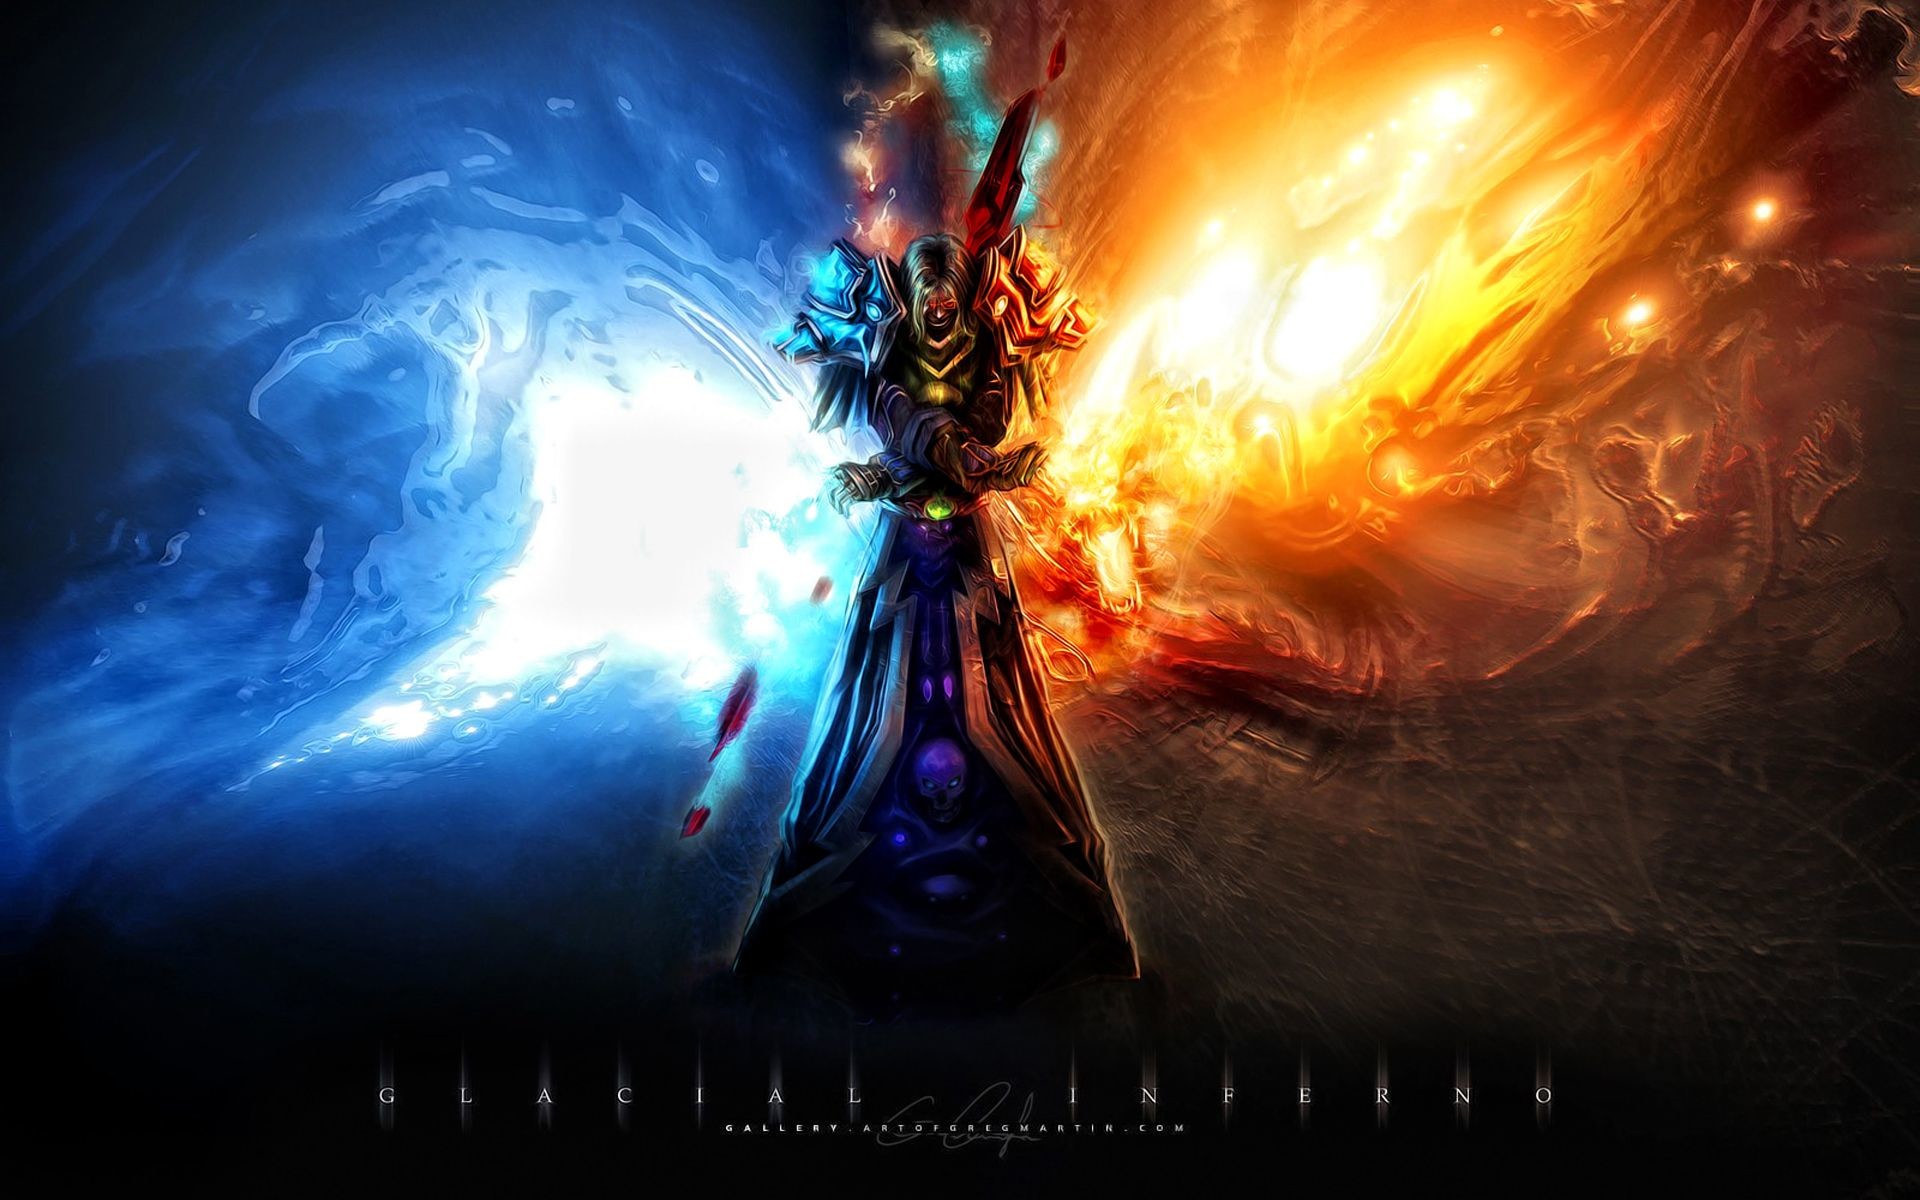 1920x1200 world of warcraft wallpaper frost mage - Google Search Top 10 Wallpapers,  Cool Desktop Backgrounds